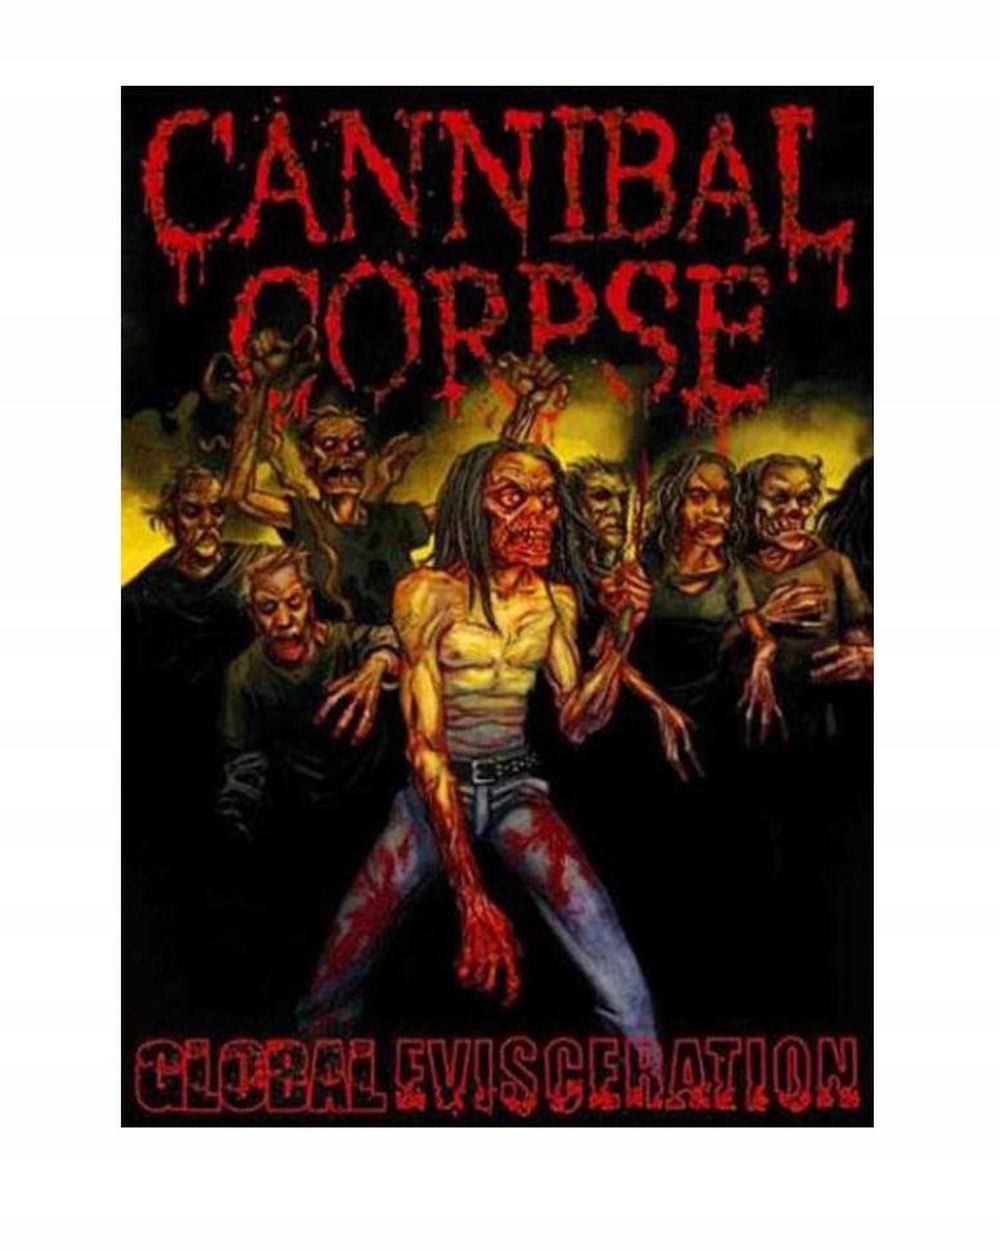 Cannibal Corpse - Global Evisceration (R1) - DVD - Music